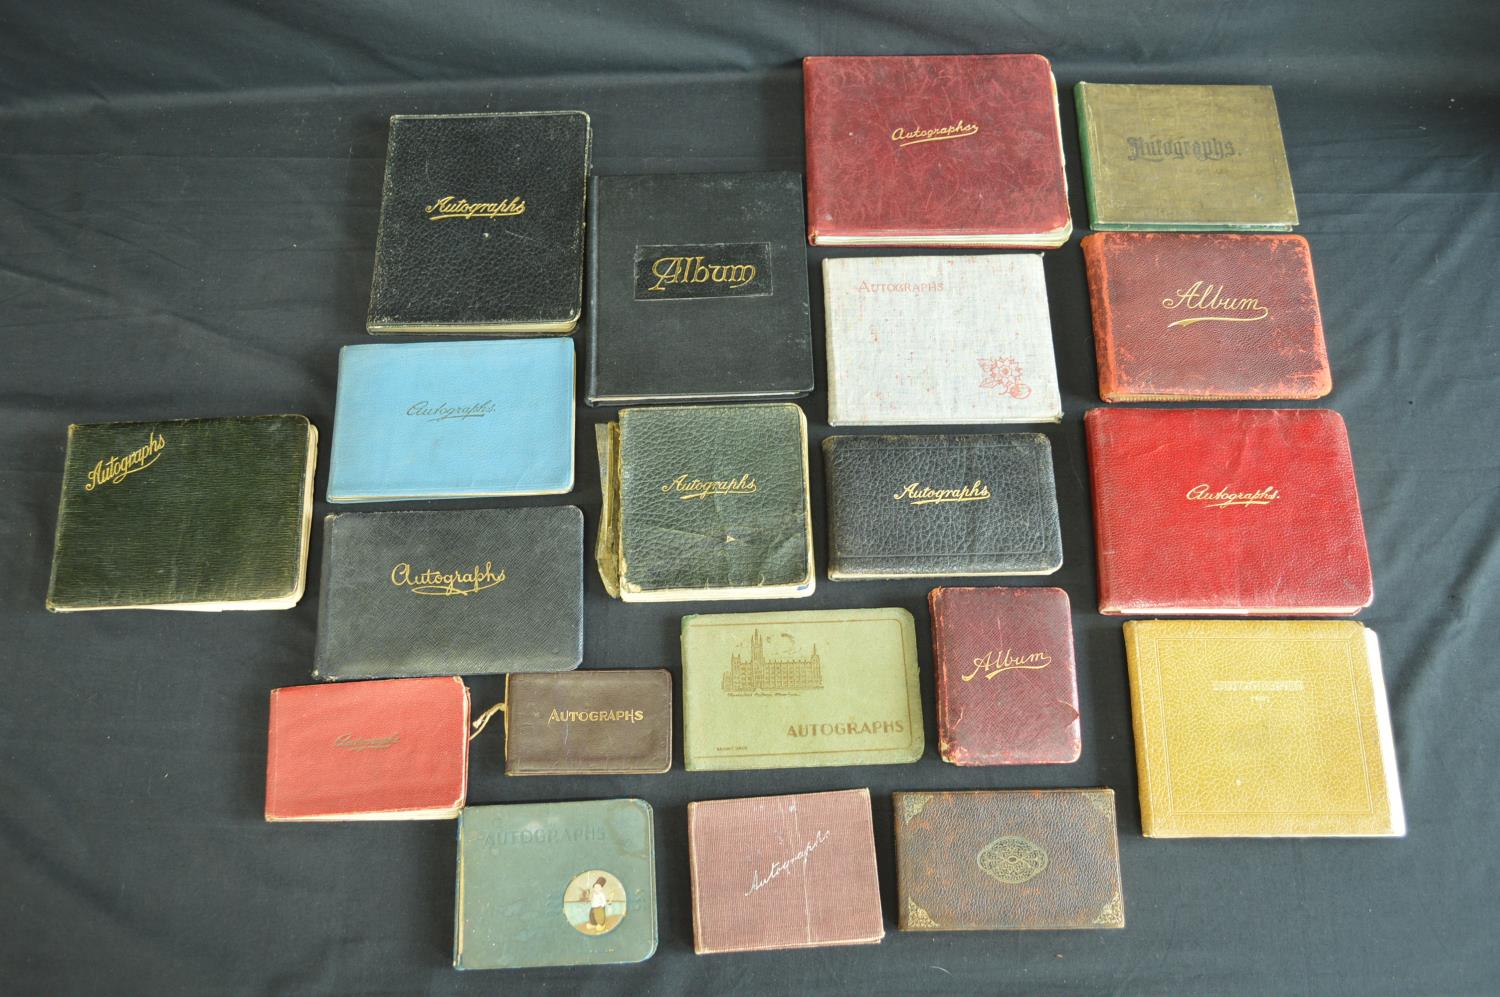 Group of twenty autograph albums having personal entries dating from the early 1900's to 1950's